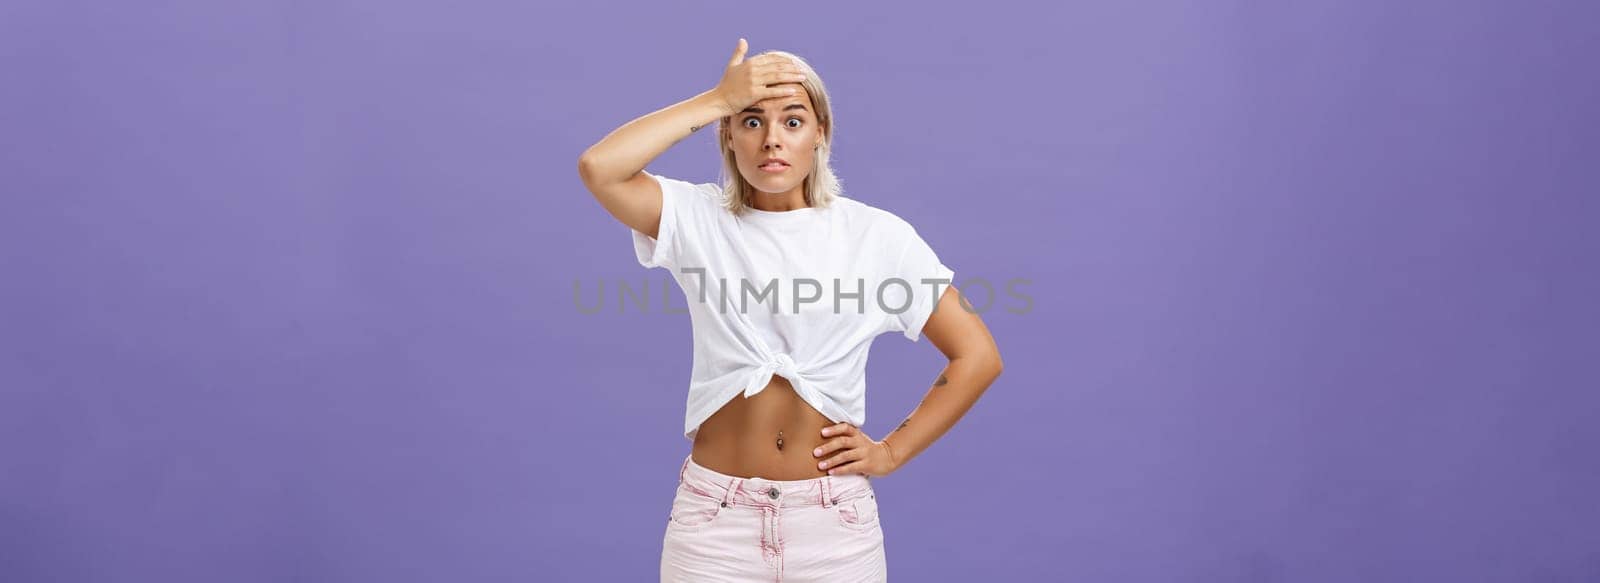 Damn I am in trouble. Worried troubled good-looking stylish female employee with tanned skin and fit body holding hand on forehead popping eyes from anxiety and making nervous face over purple wall.